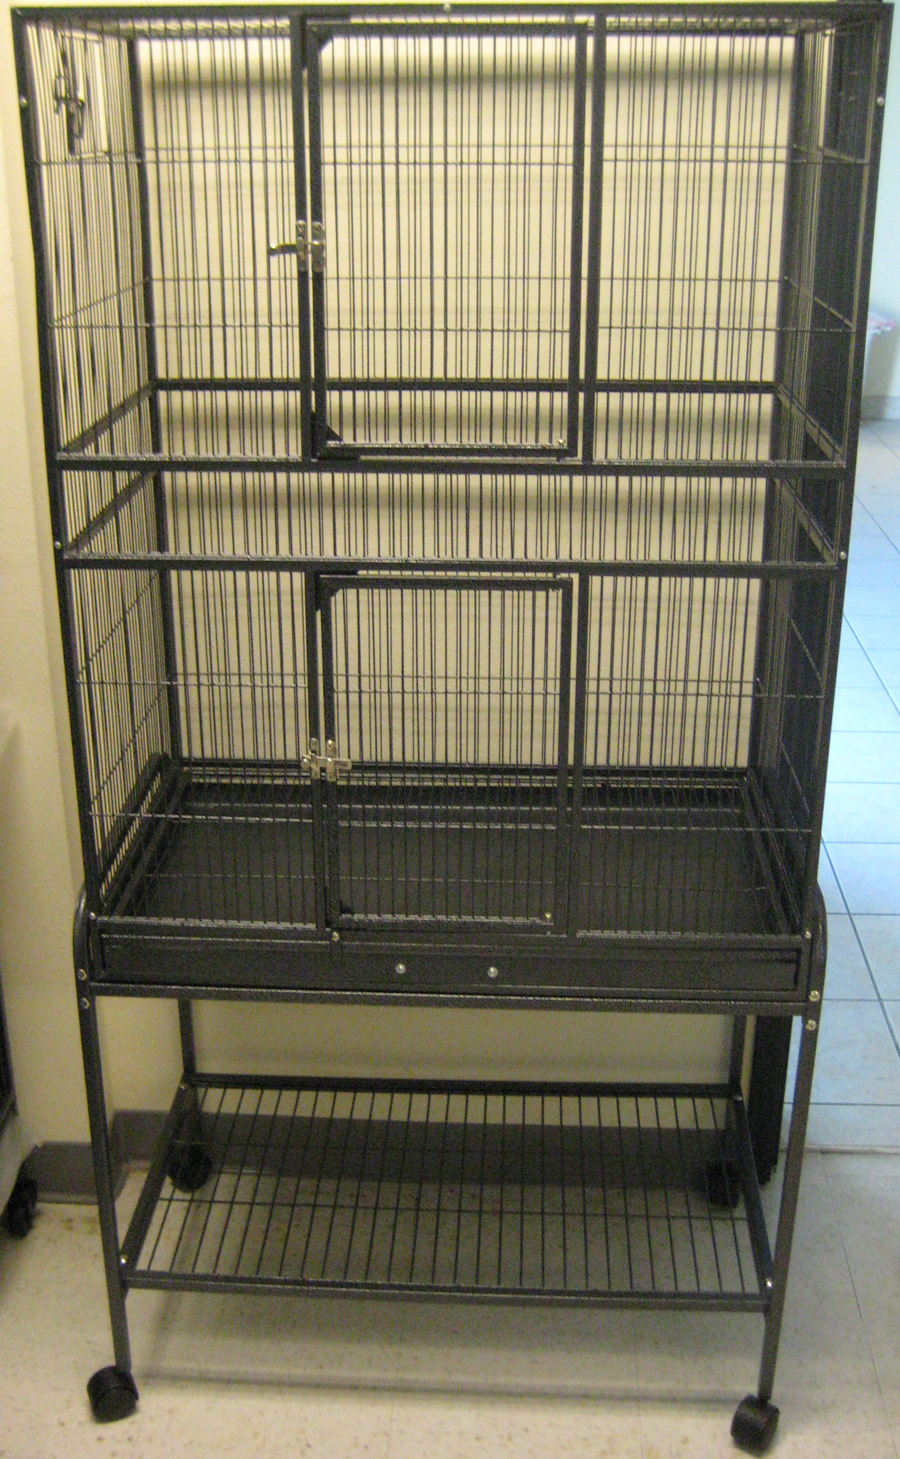   large wrought iron bird parrot cage cockatiel conure large 30 x18 x62